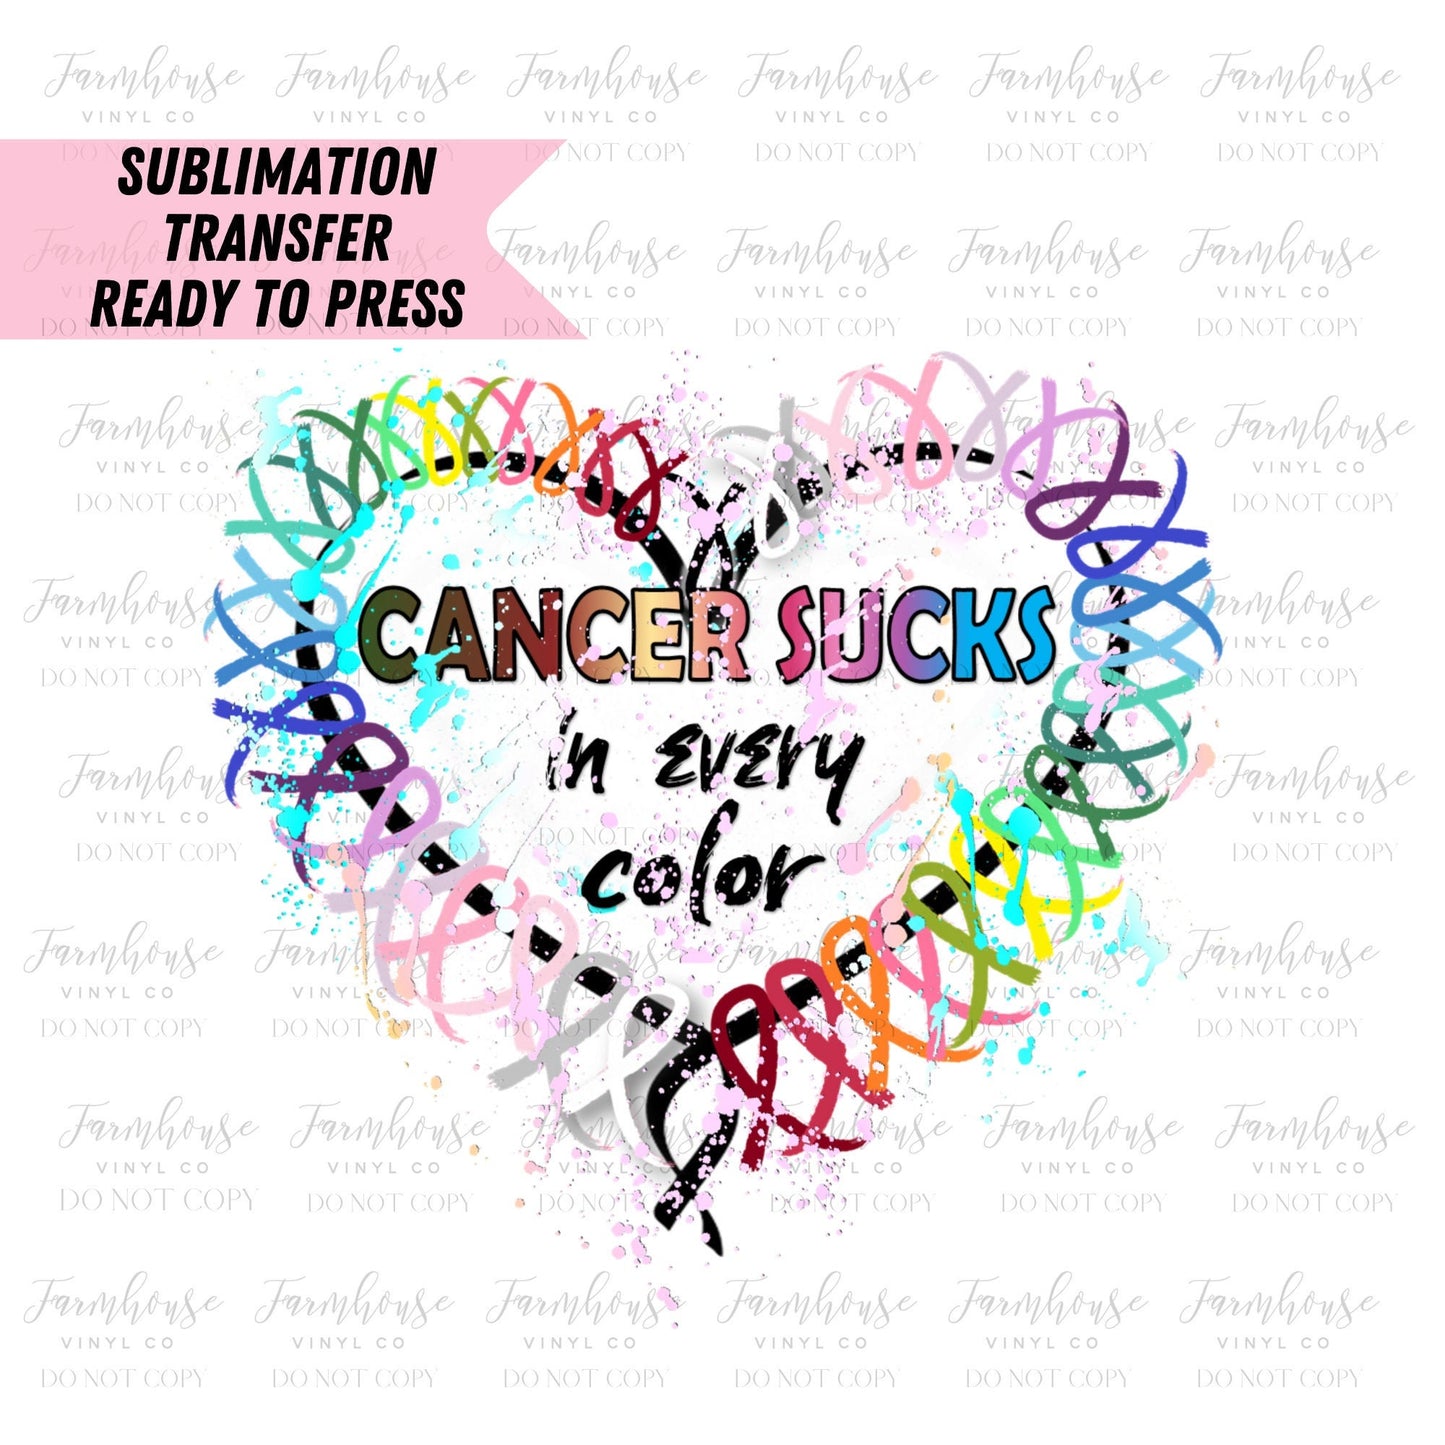 Cancer Sucks in Every Color Ribbon Ready to Press Sublimation Transfer - Farmhouse Vinyl Co